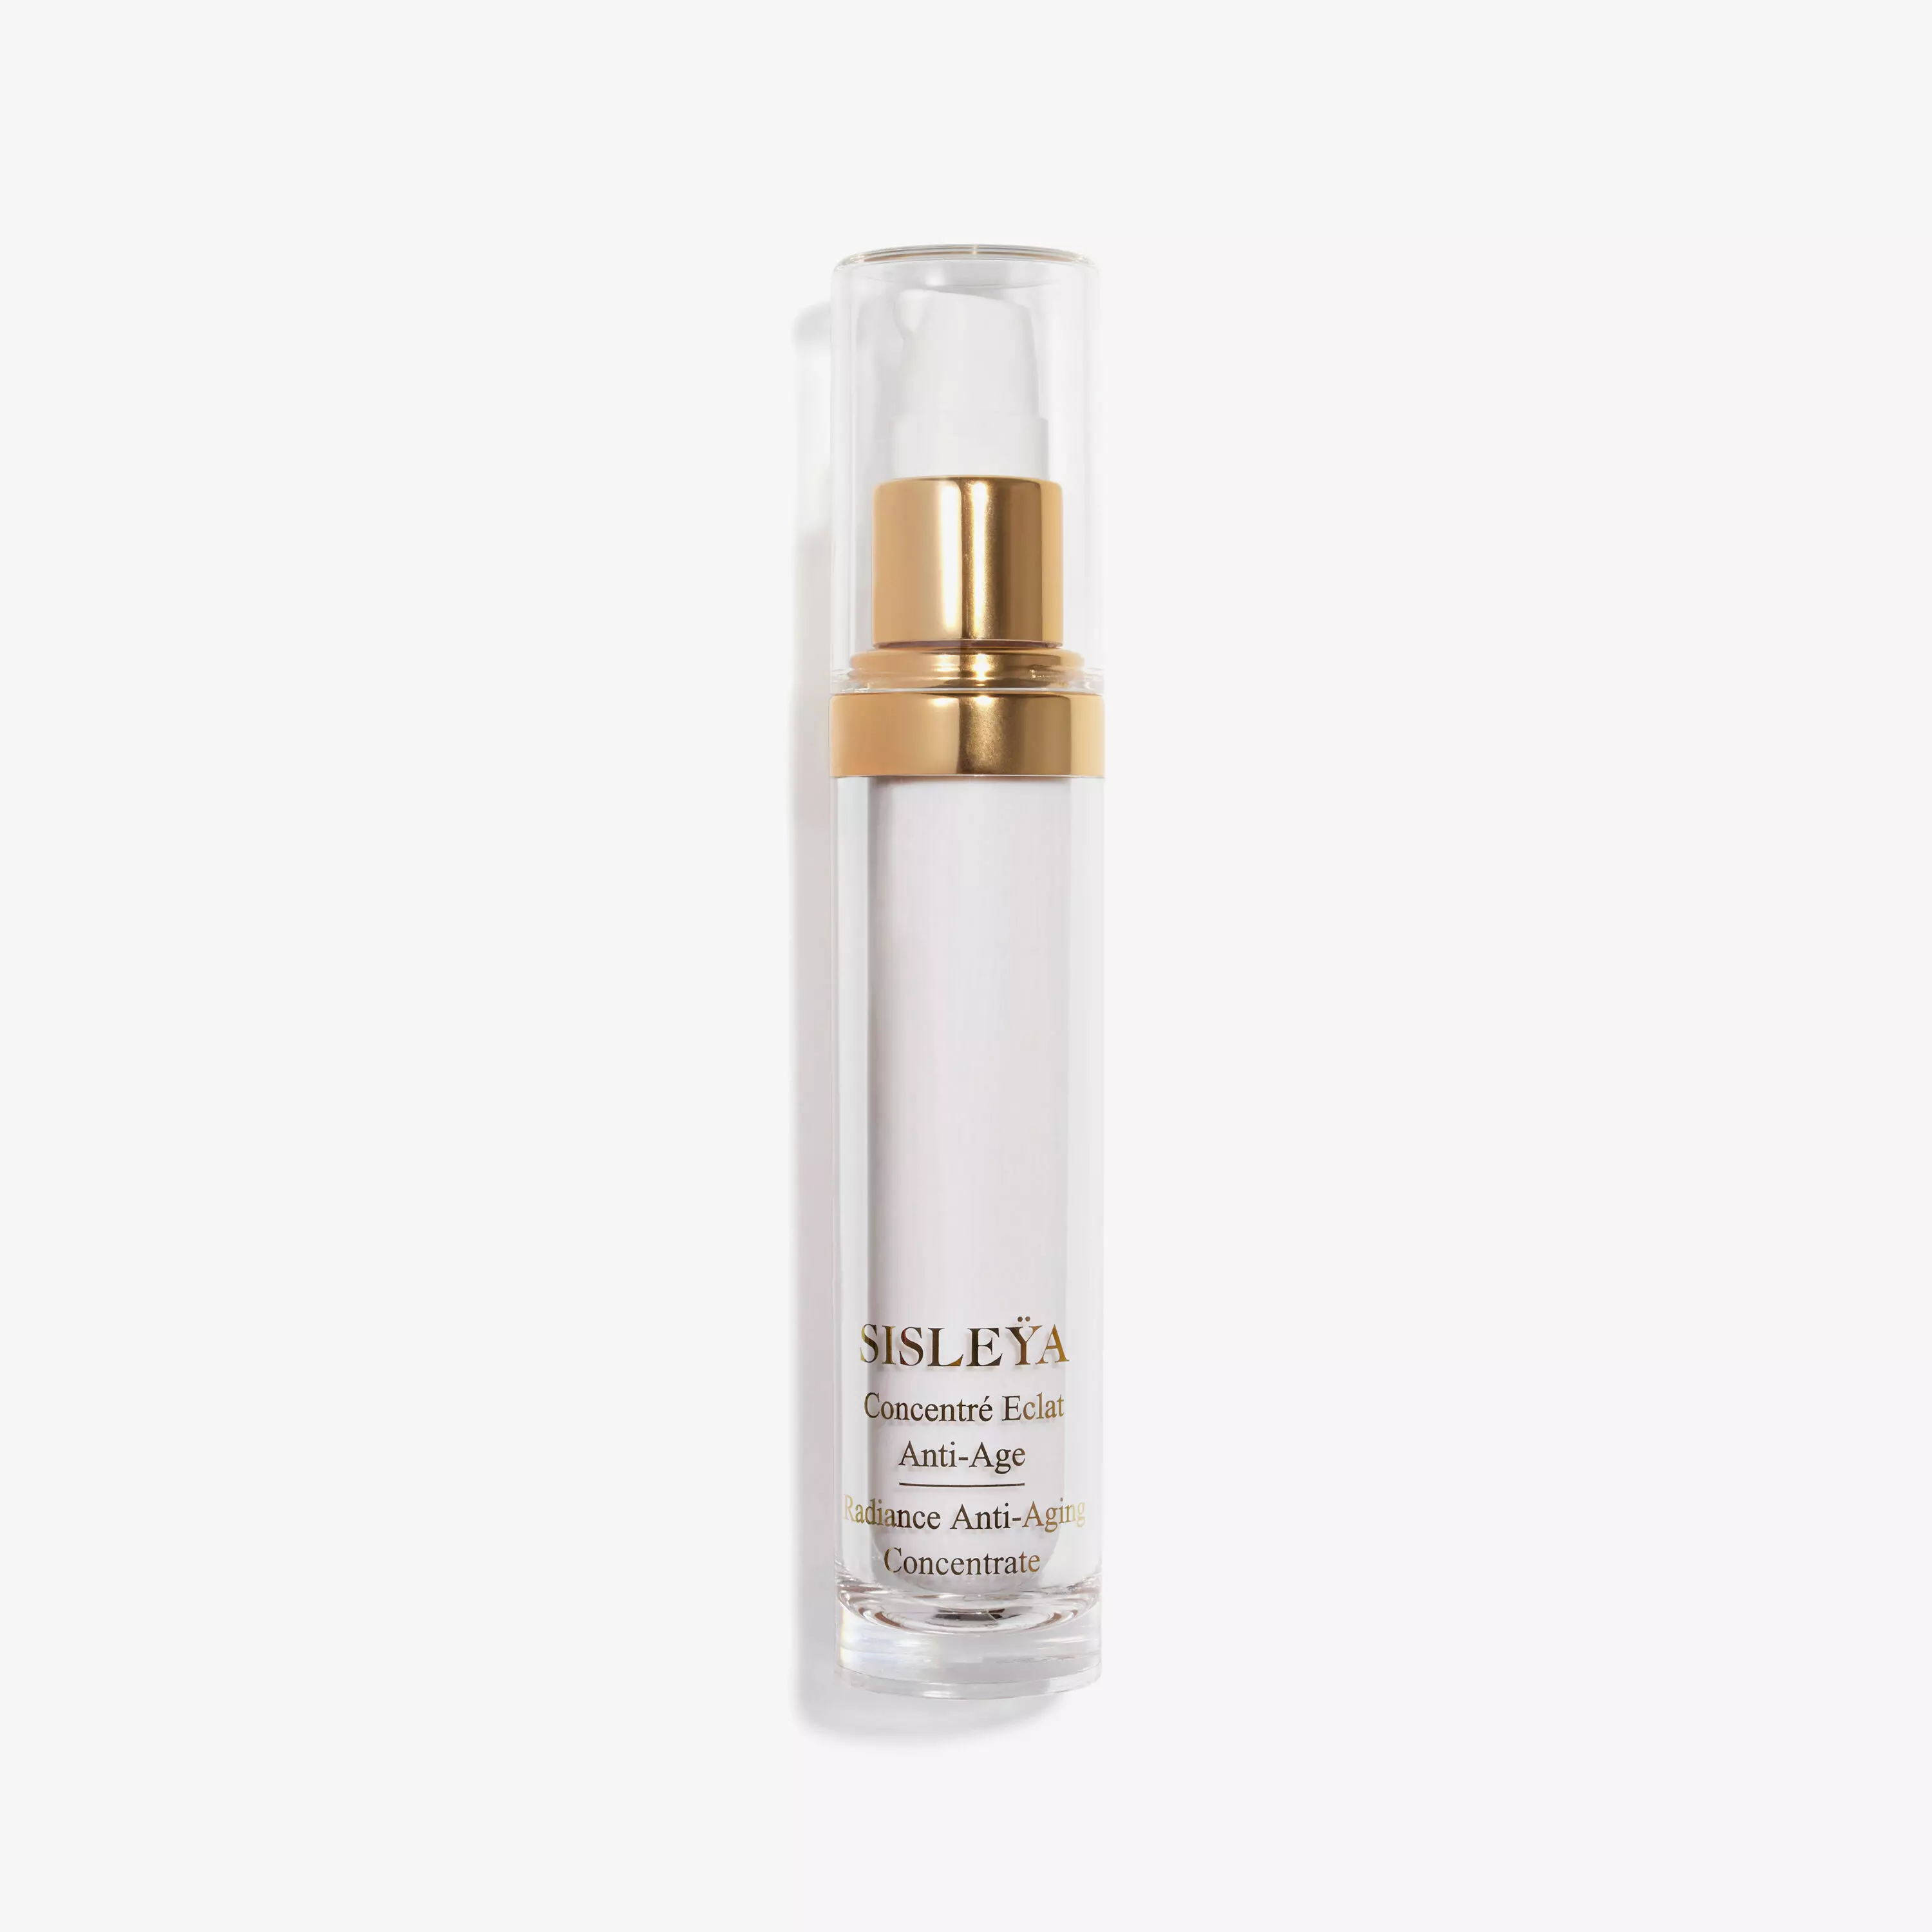 Sisley Radiance Anti-Aging Concentrate Creme for Unisex, 1.06 Ounce